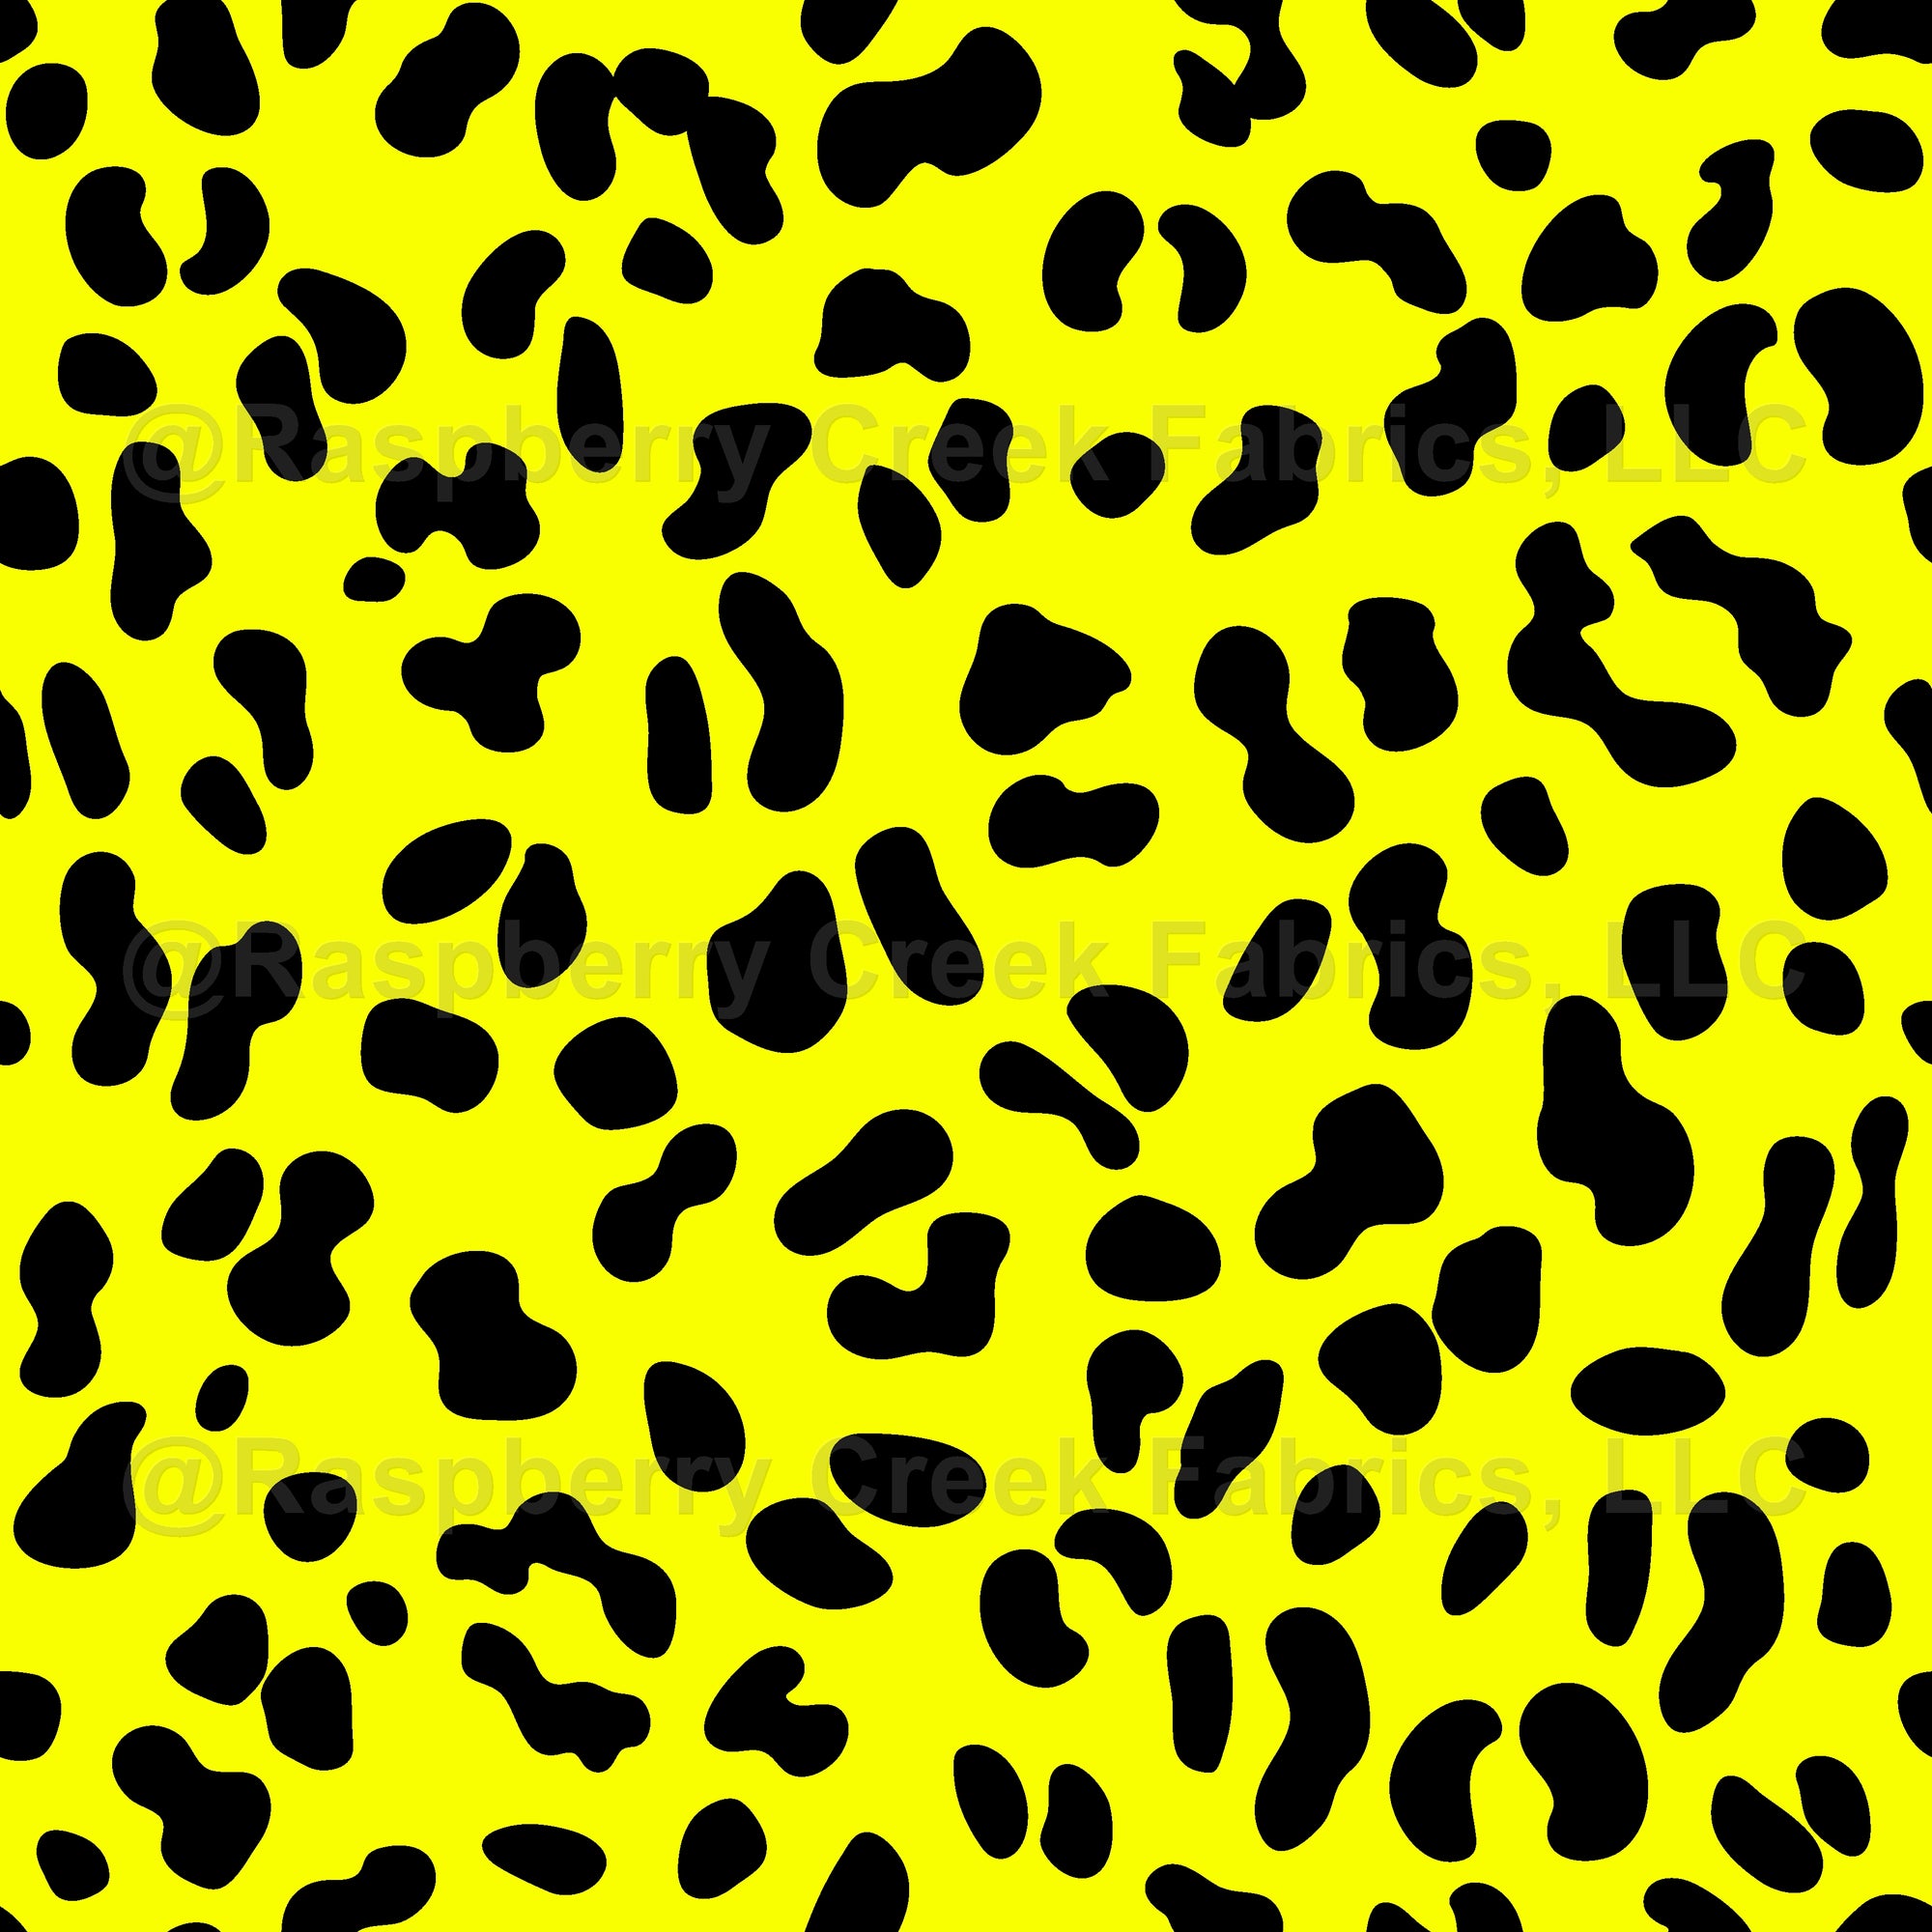 80s Neon Pink and Lime Green Leopard Print Fabric, Raspberry Creek